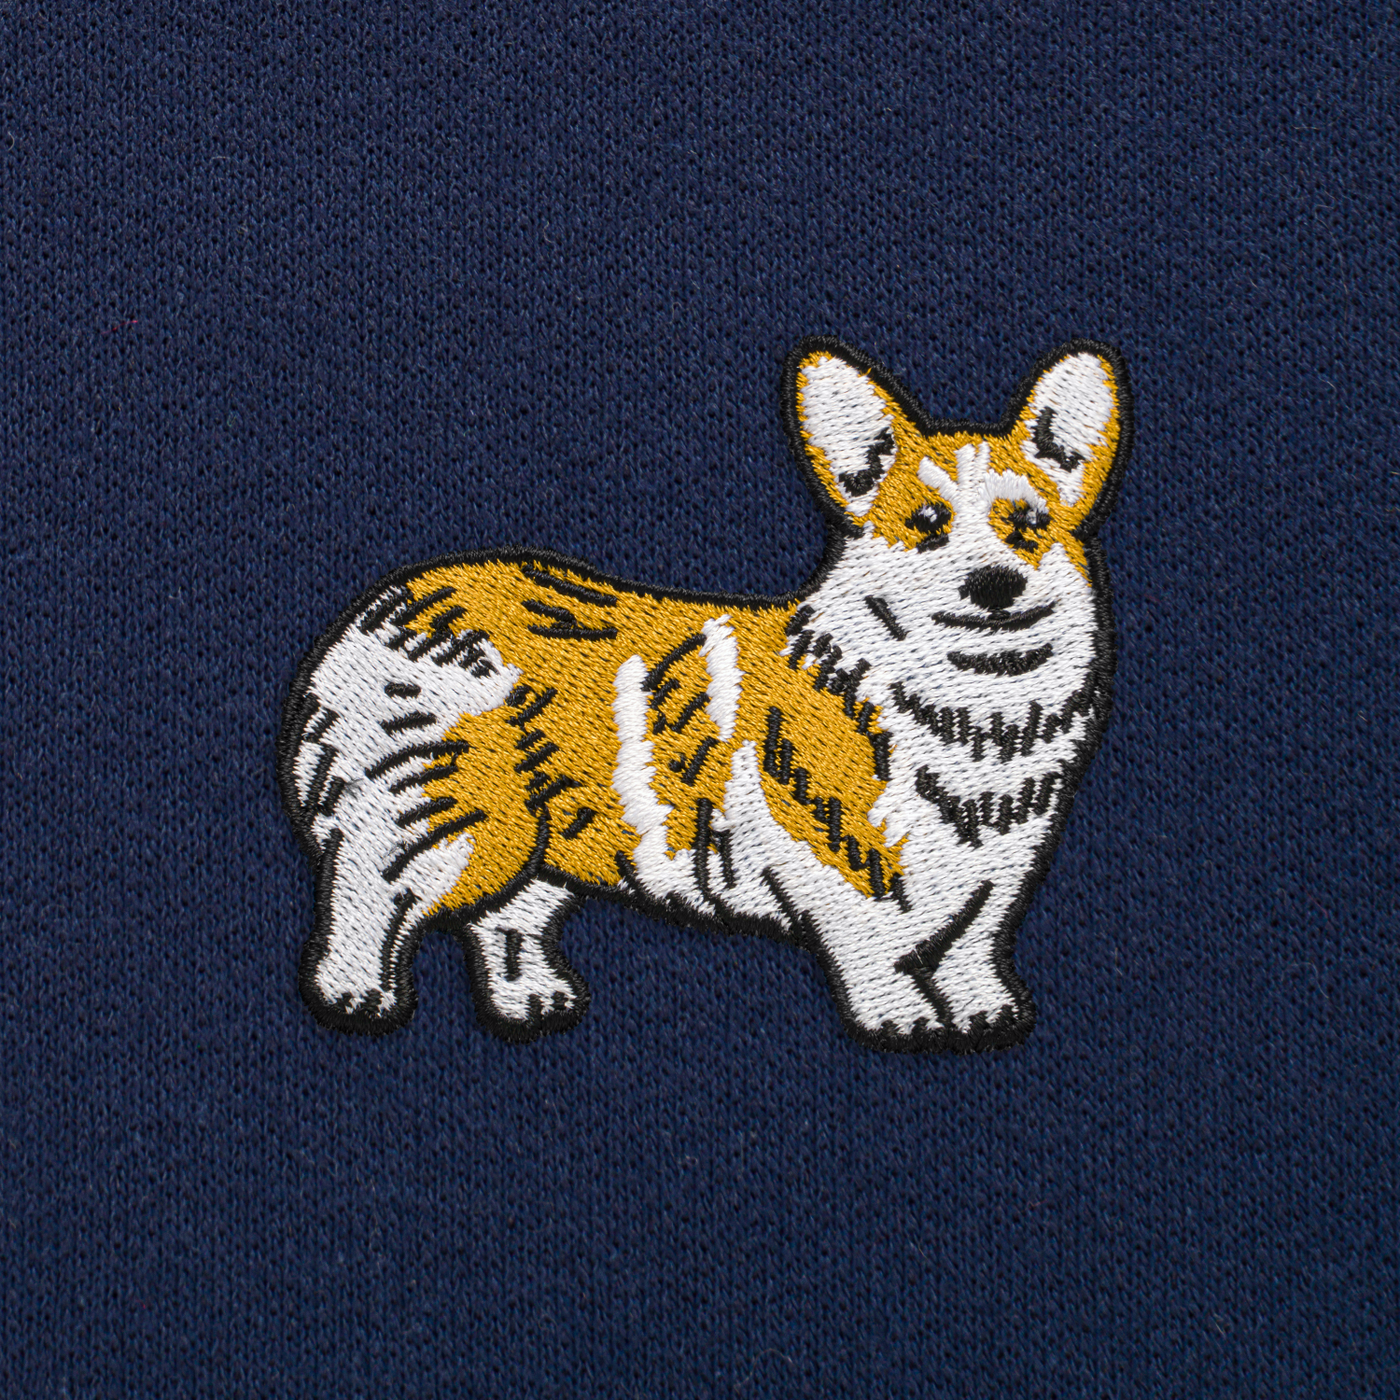 Bobby's Planet Unisex Embroidered Corgi Joggers from Paws Dog Cat Animals Collection in Navy Color#color_navy